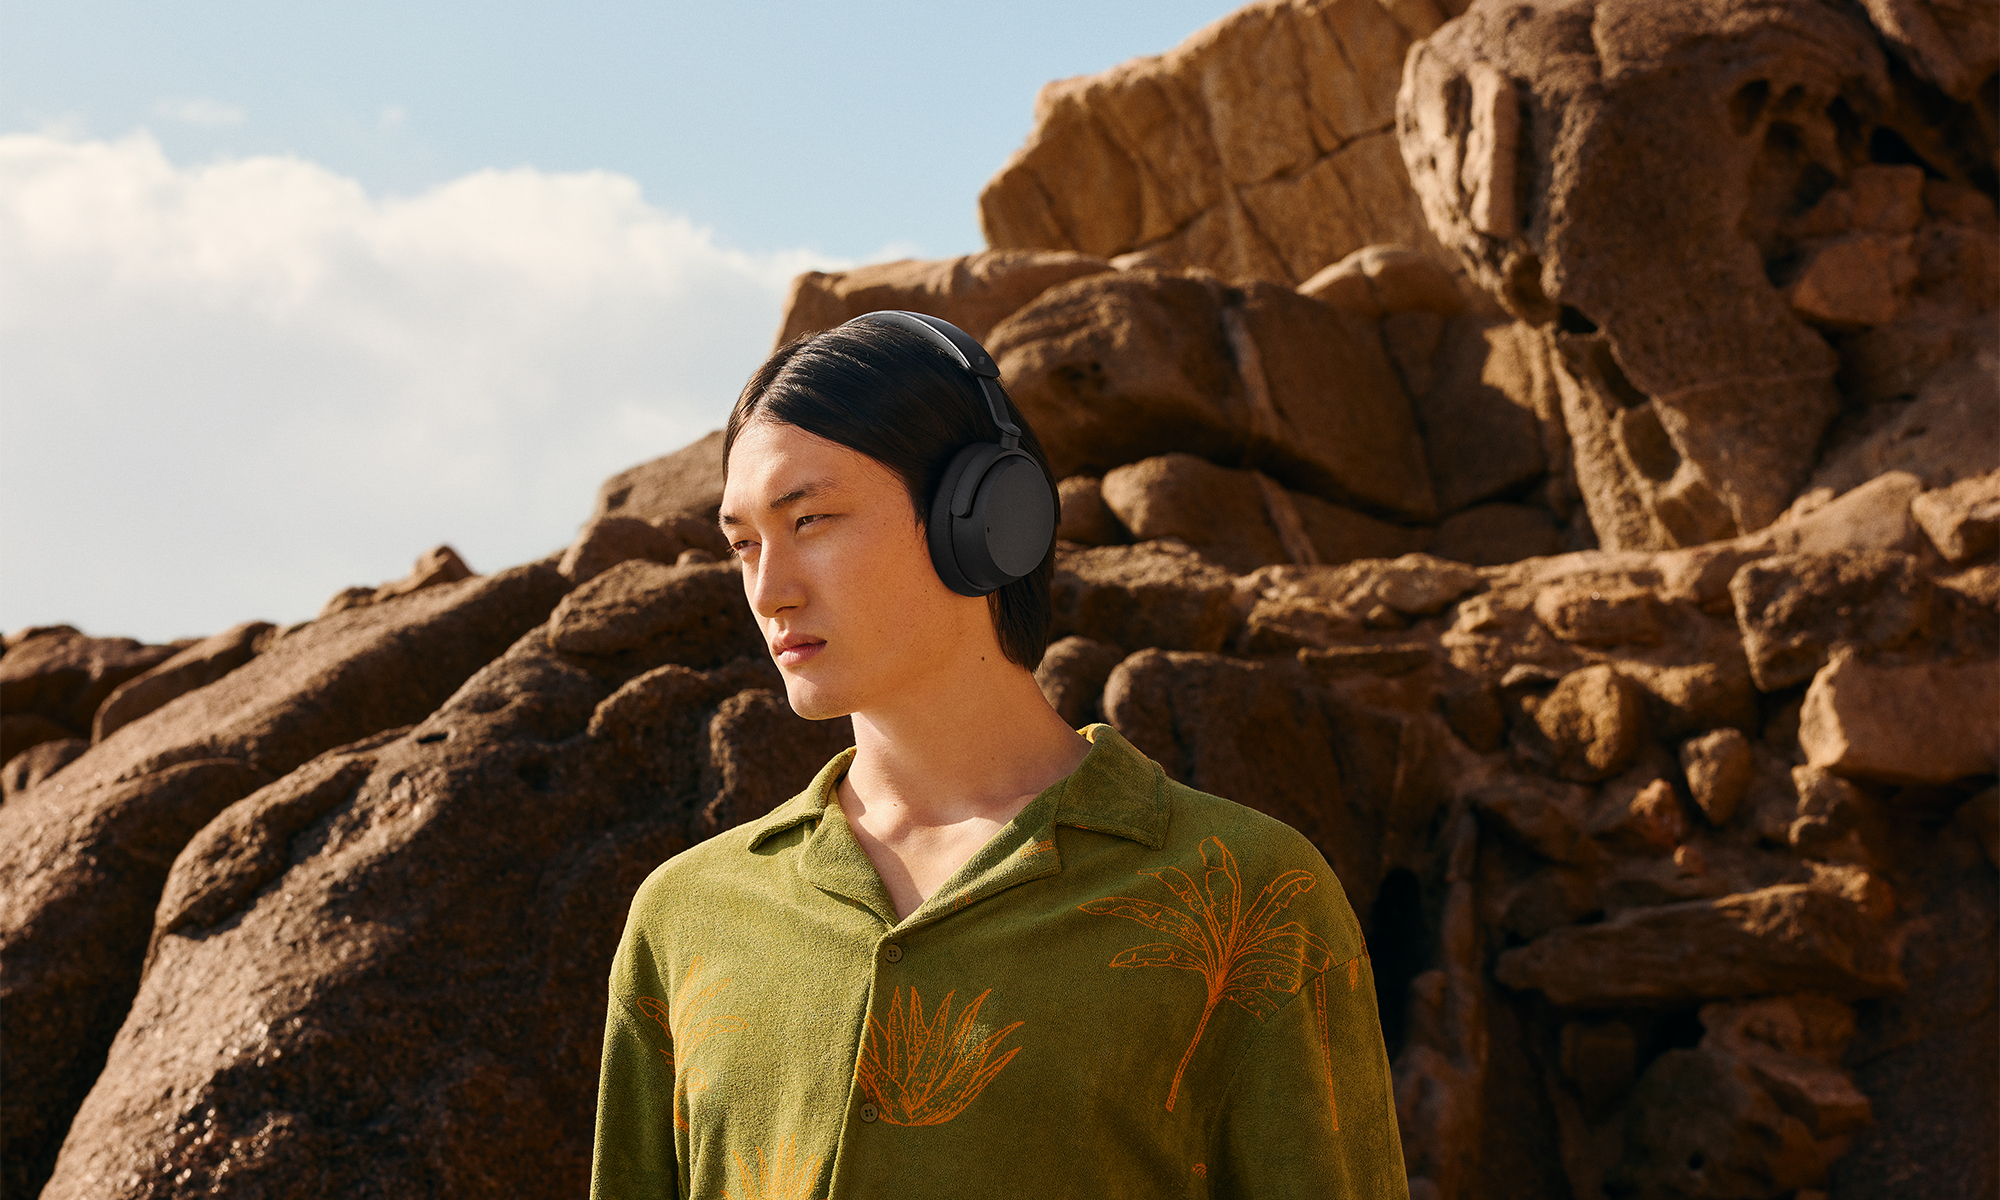 Lifestyle marketing photo for the Sennheiser Accentum Wireless headphones. A young man stands along a rocky terrain: jutting rocks behind him. He wears a green button-down shirt with gold / orange floral patterns.